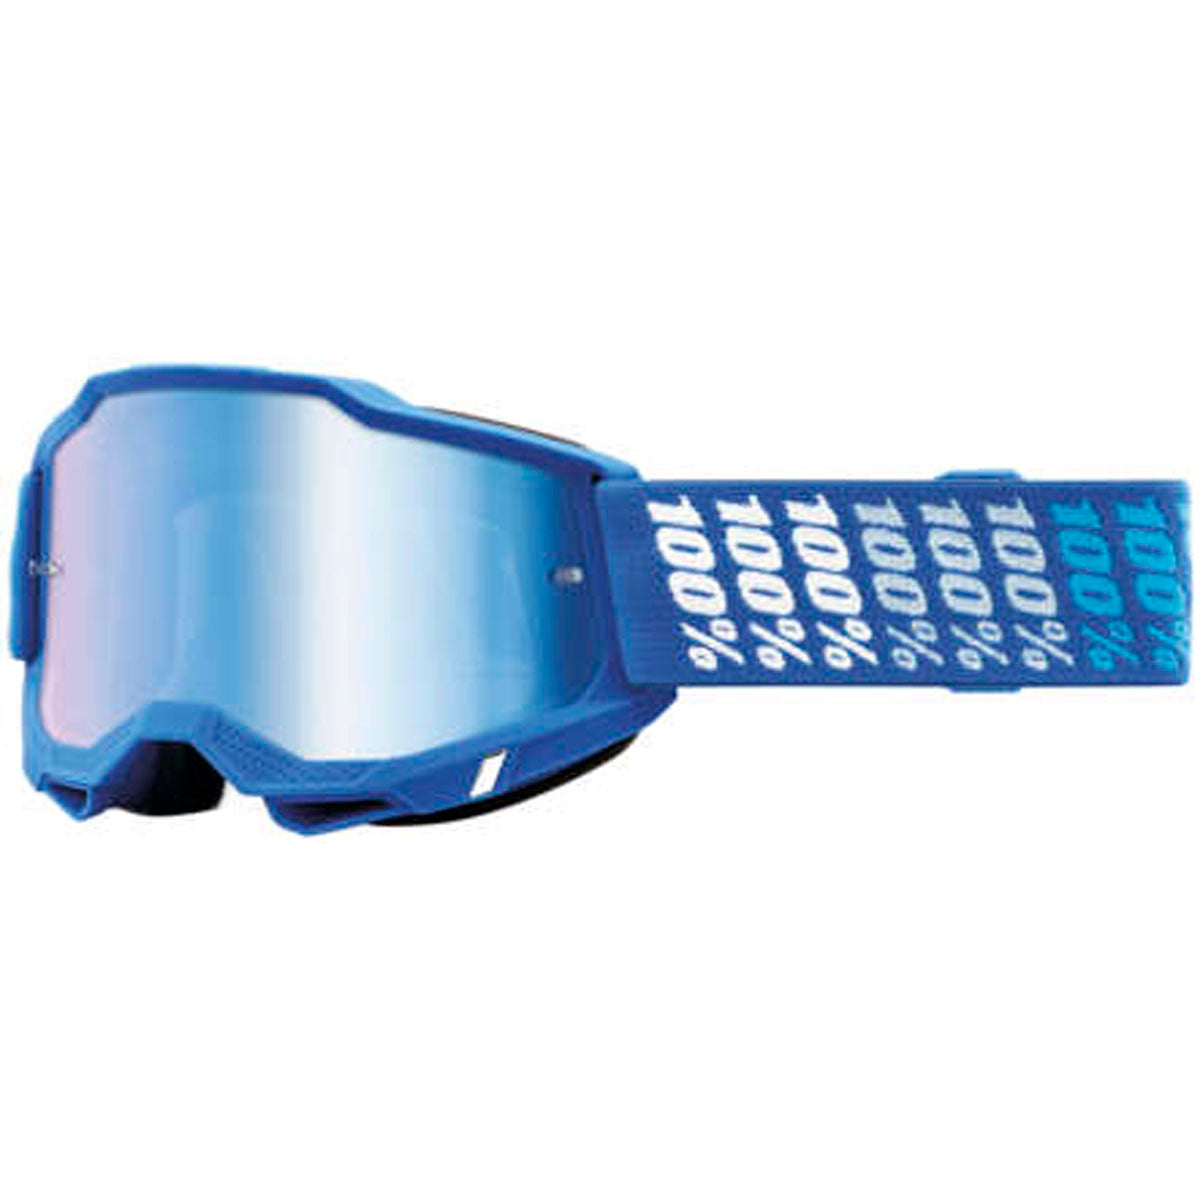 100% Accuri 2 Goggles Yarger / Blue Mirrored Lens